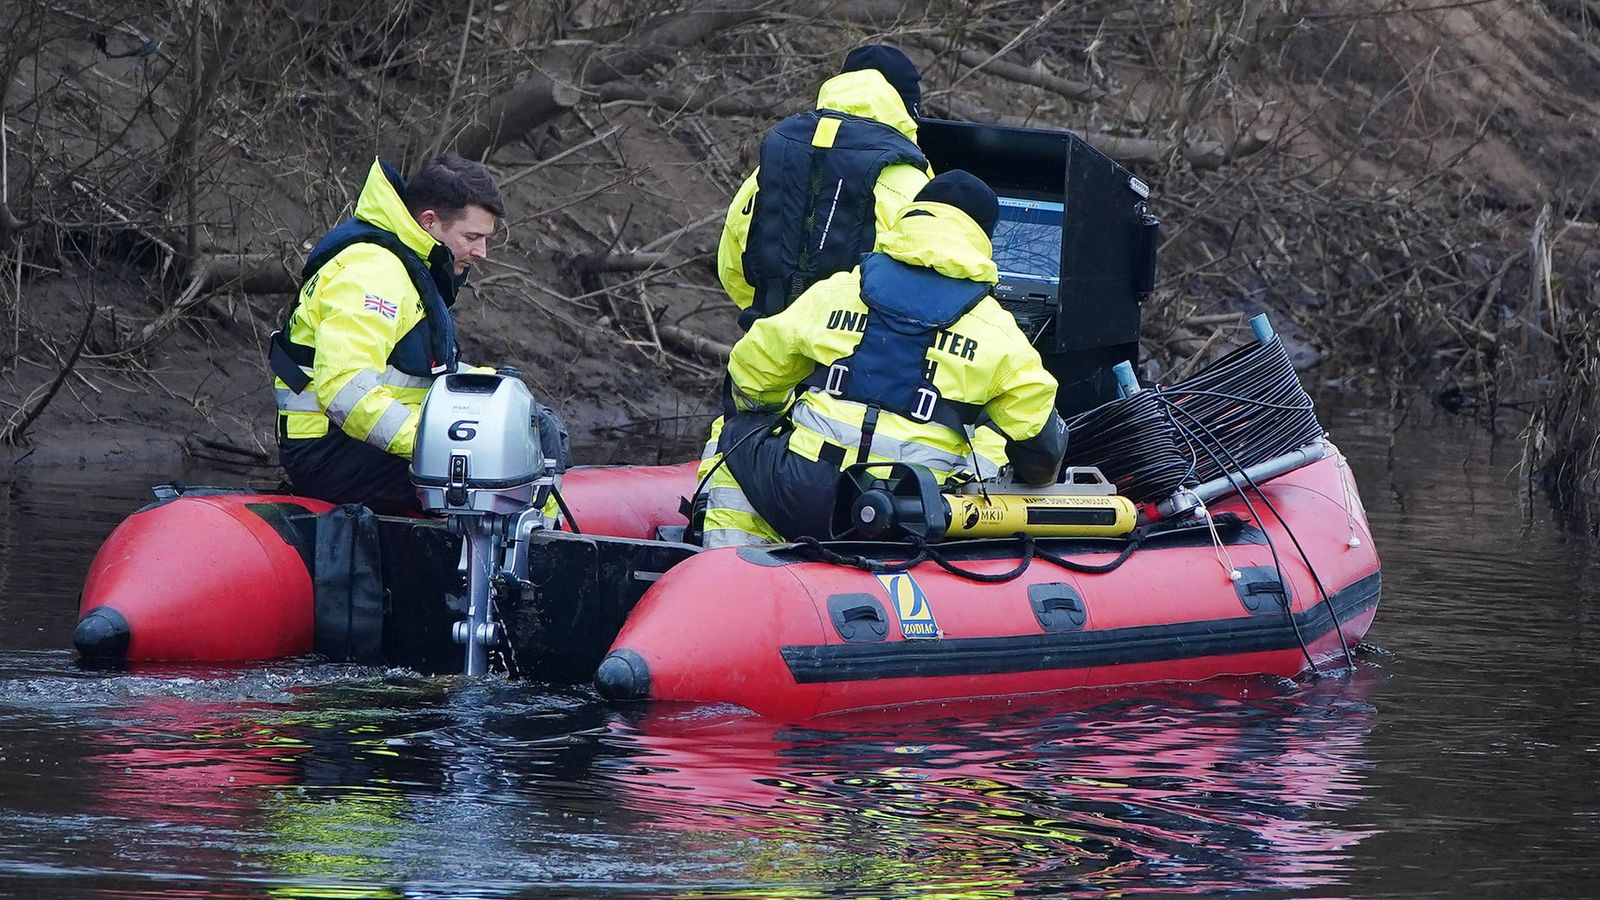 Dive specialist says knowing Nicola Bulley was 'high risk' would have 'changed our whole search'